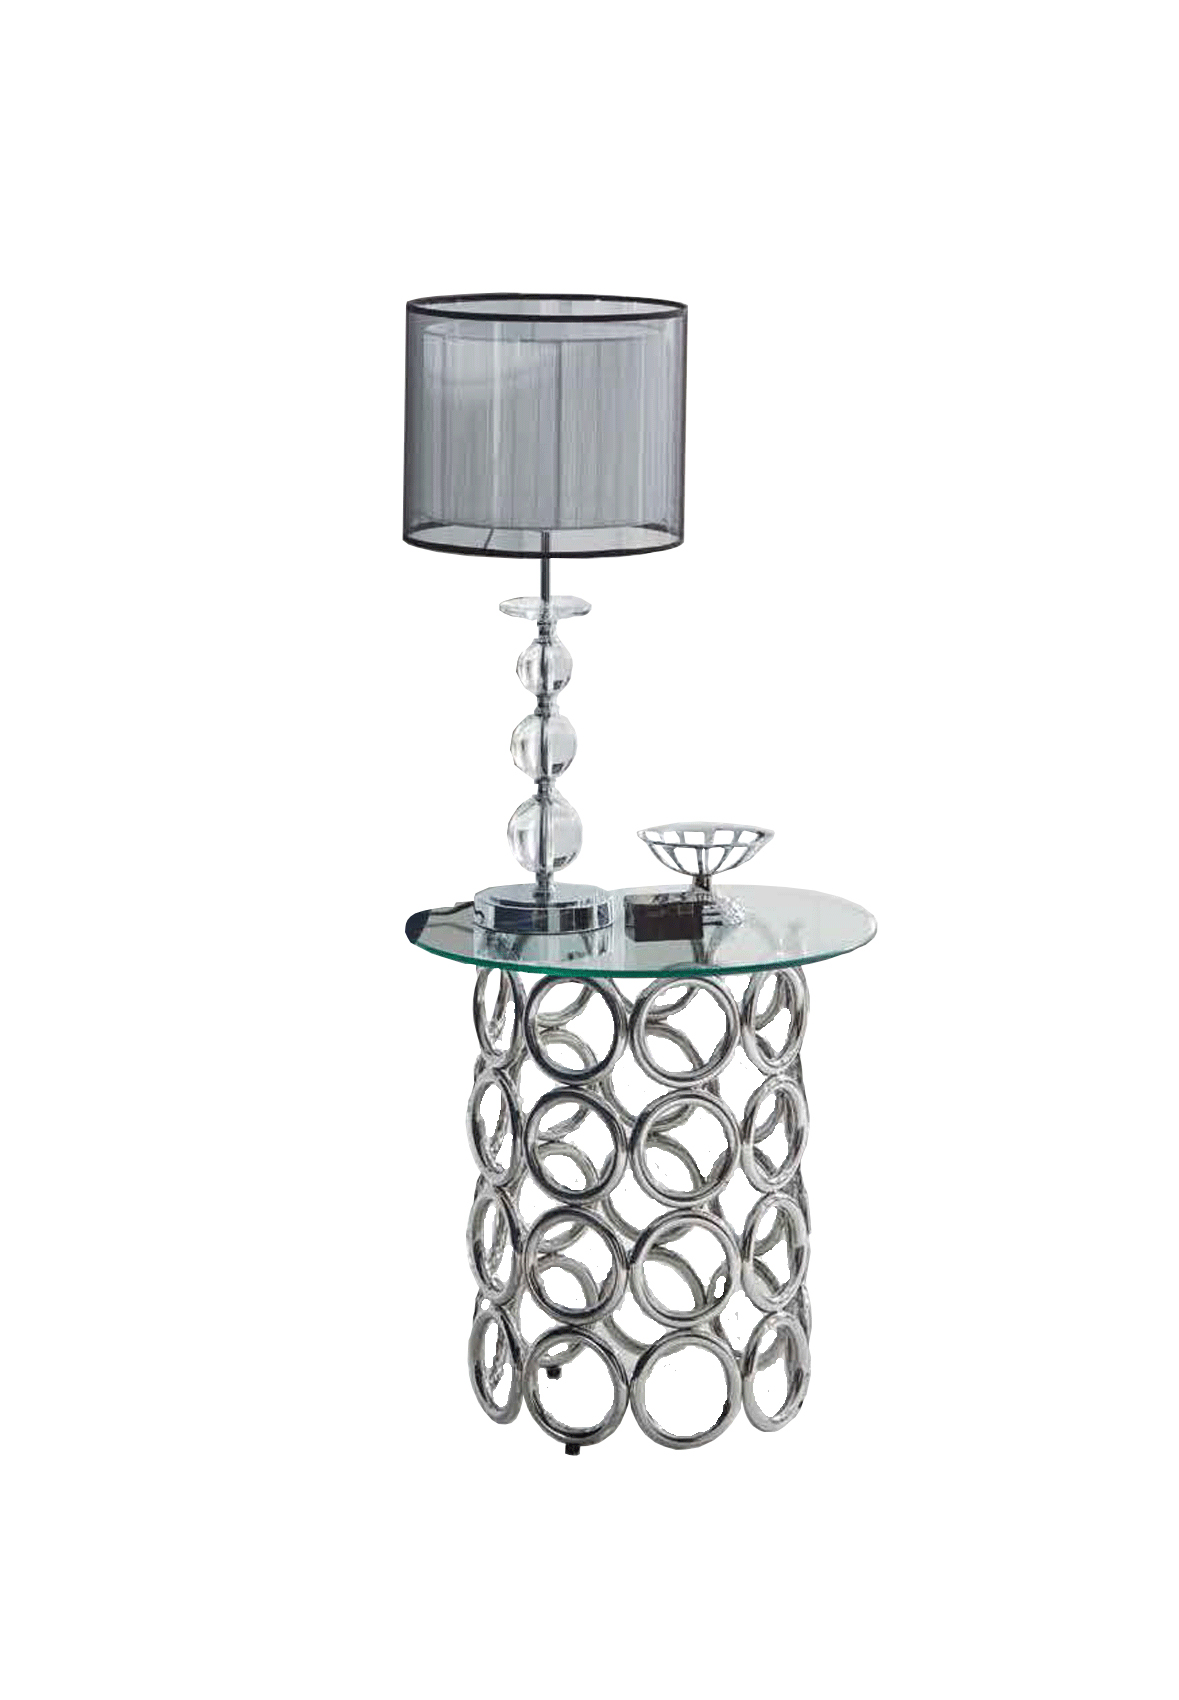 Clearance Living Room CT-233 Coffee table, TO-9123 Lamp Table